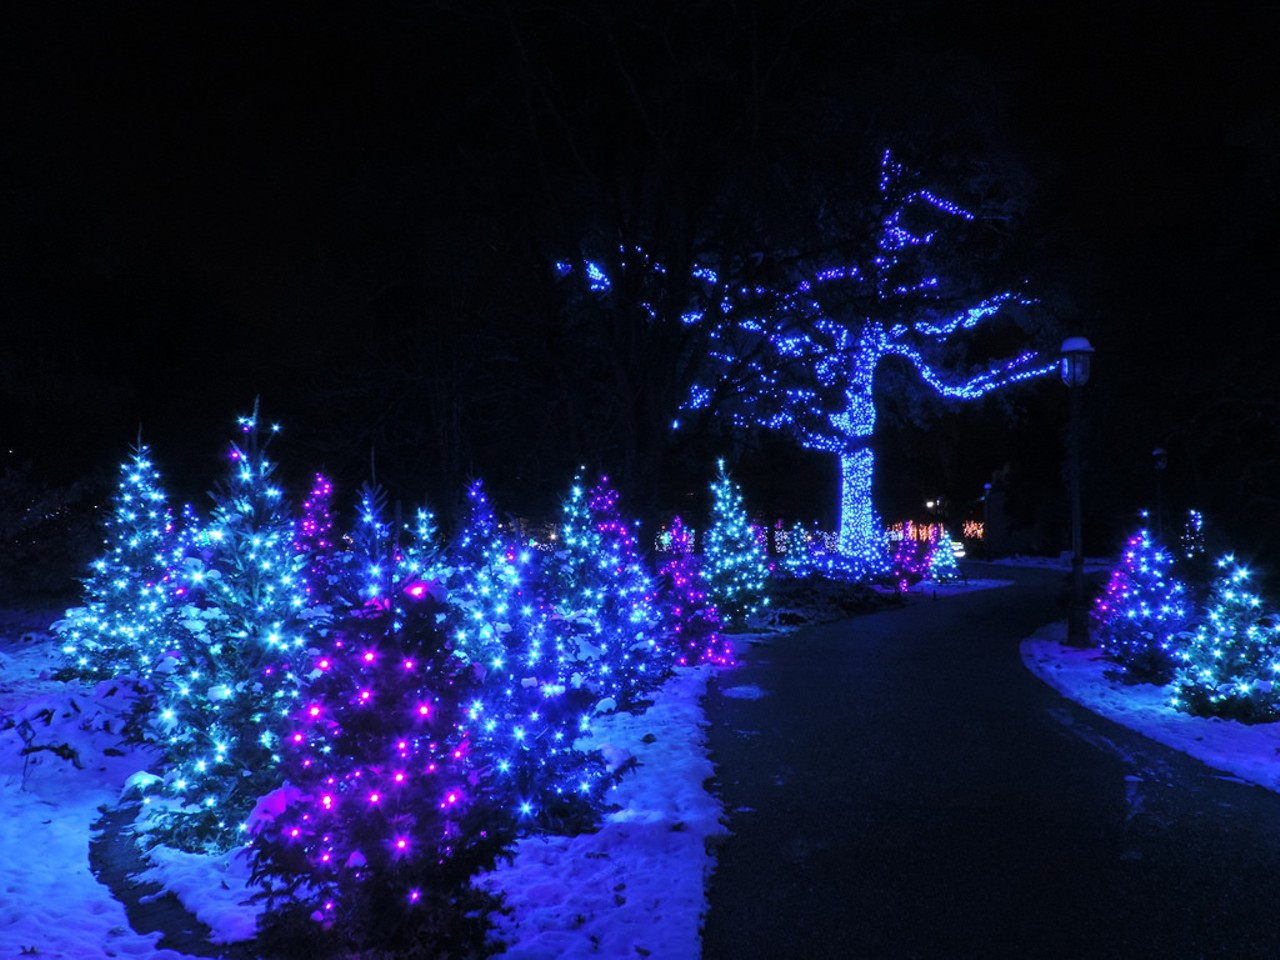 Garden Glow
Missouri Botanical Garden
4344 Shaw Blvd.
St. Louis, MO 63110
(314) 577-5100
November 18 to January 1
Garden Glow has quickly become a favorite St. Louis tradition with its millions of lights taking over the Missouri Botanical Garden. Interactive photo ops, food and drinks, holiday music and more are also part of the fun. Prices and schedule vary; click here for details. Photo by Tom Incrocci. Photo courtesy Missouri Botanical Garden.